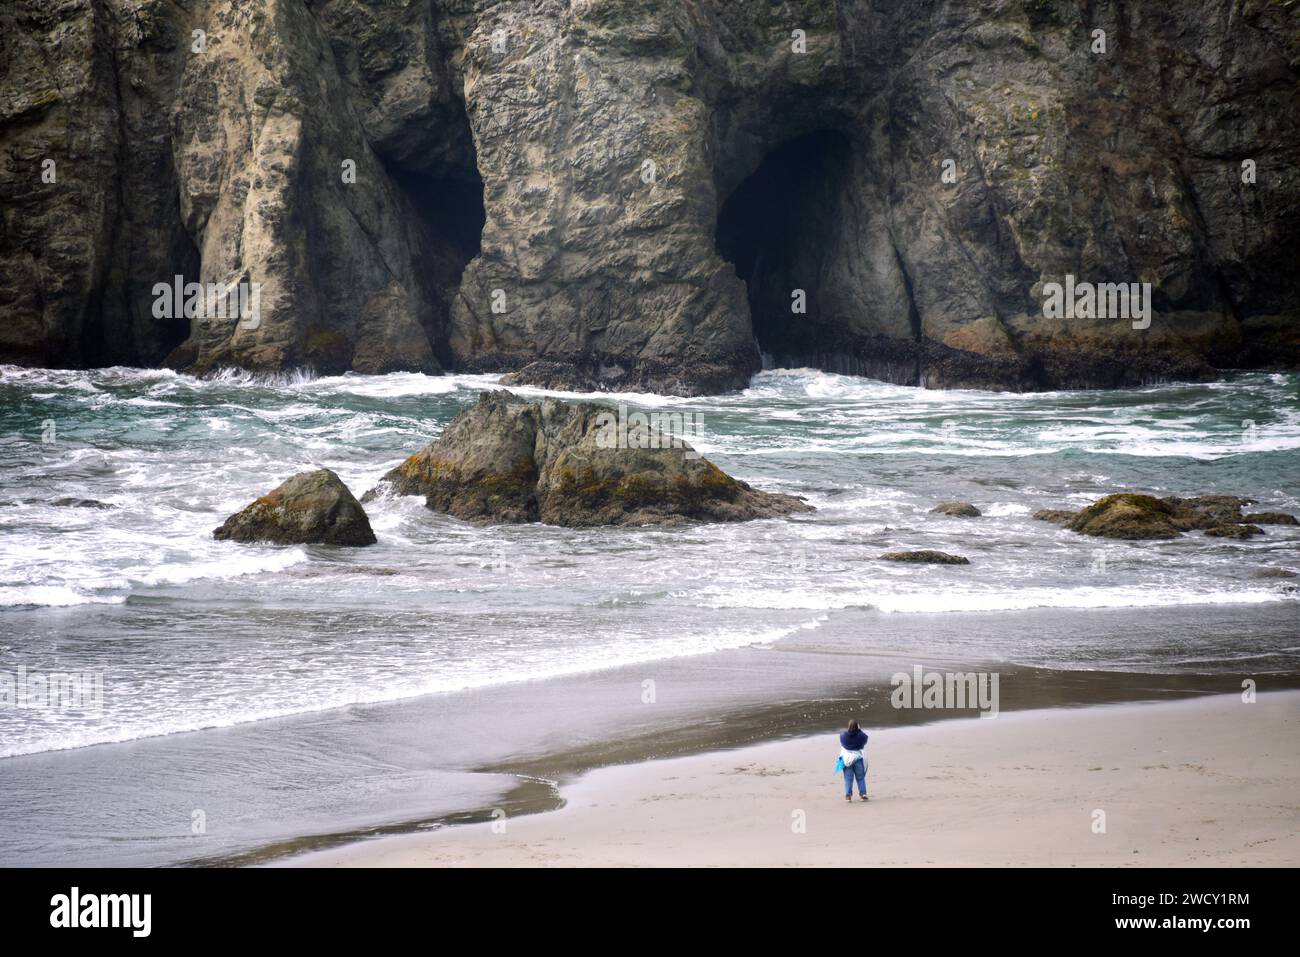 Visitor photographs Elephant Rock, in Bandon, Oregon.  Compared to the size of the towering rock formation visitor is tiny. Stock Photo